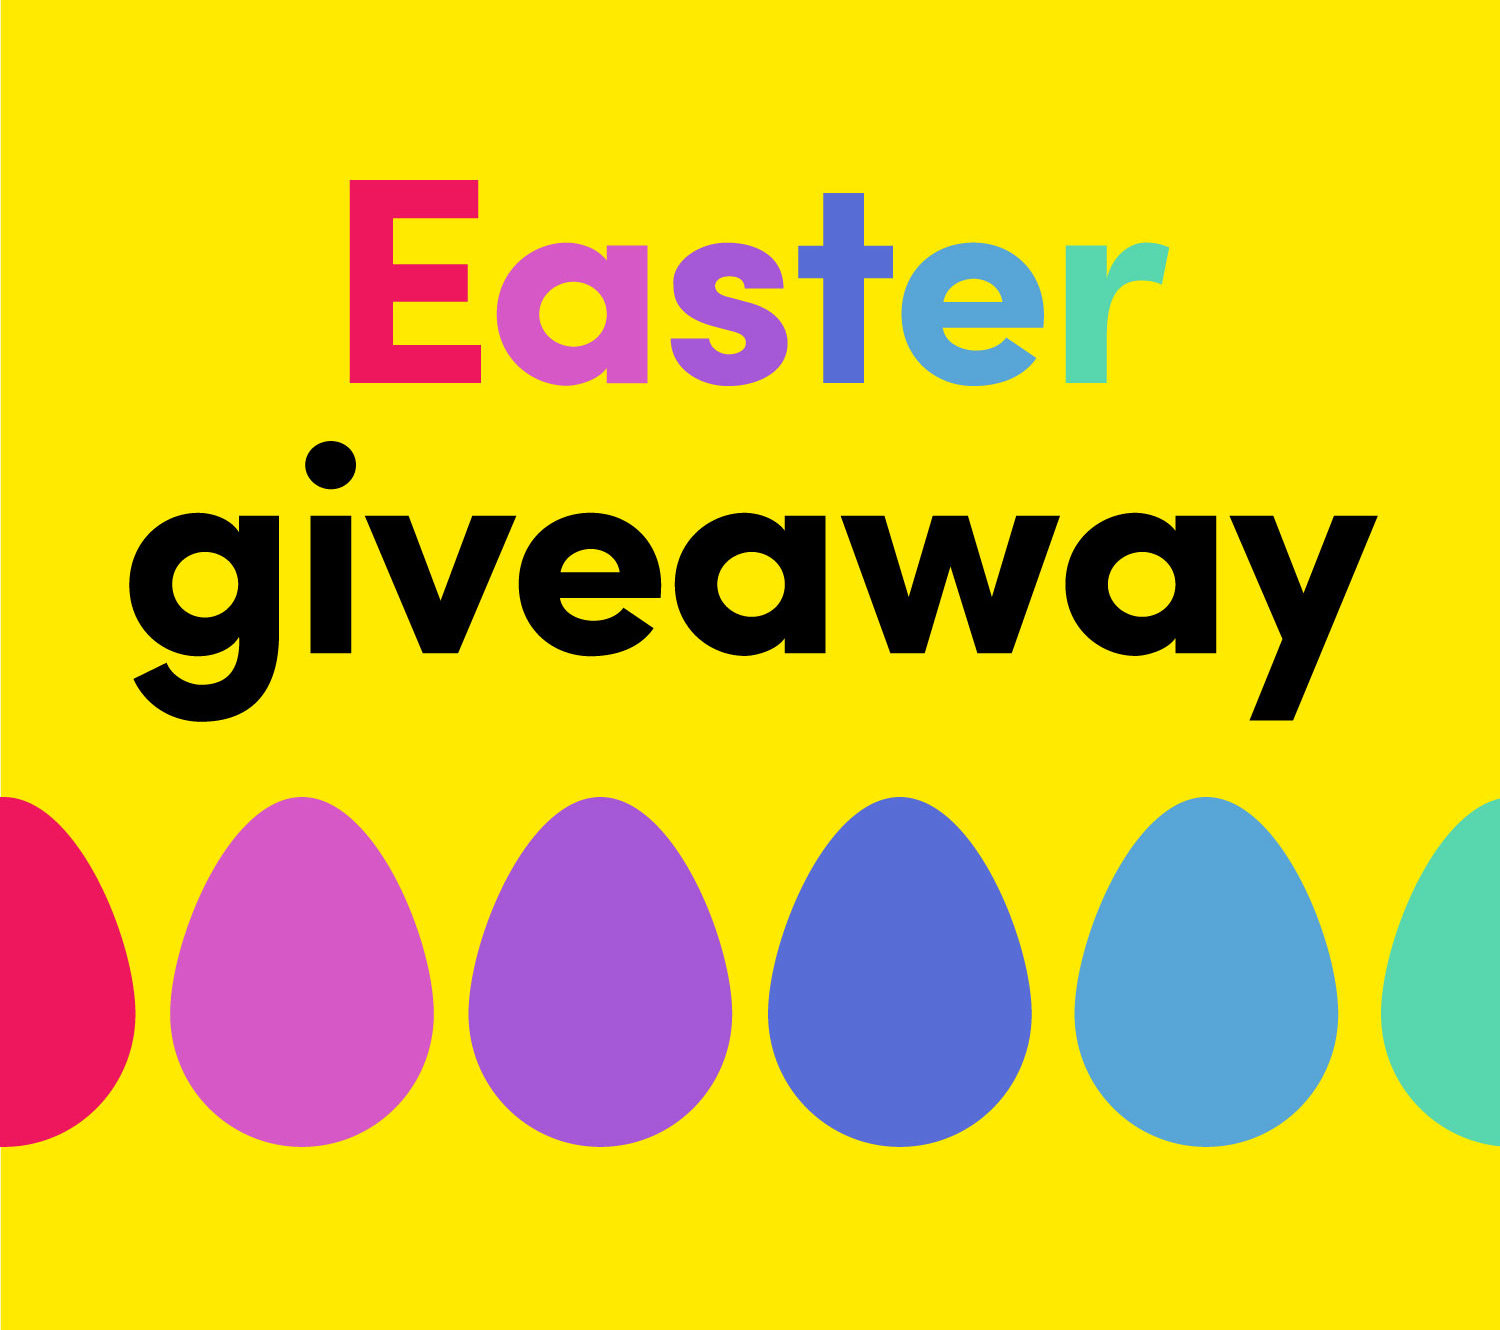 Easter giveaway graphic